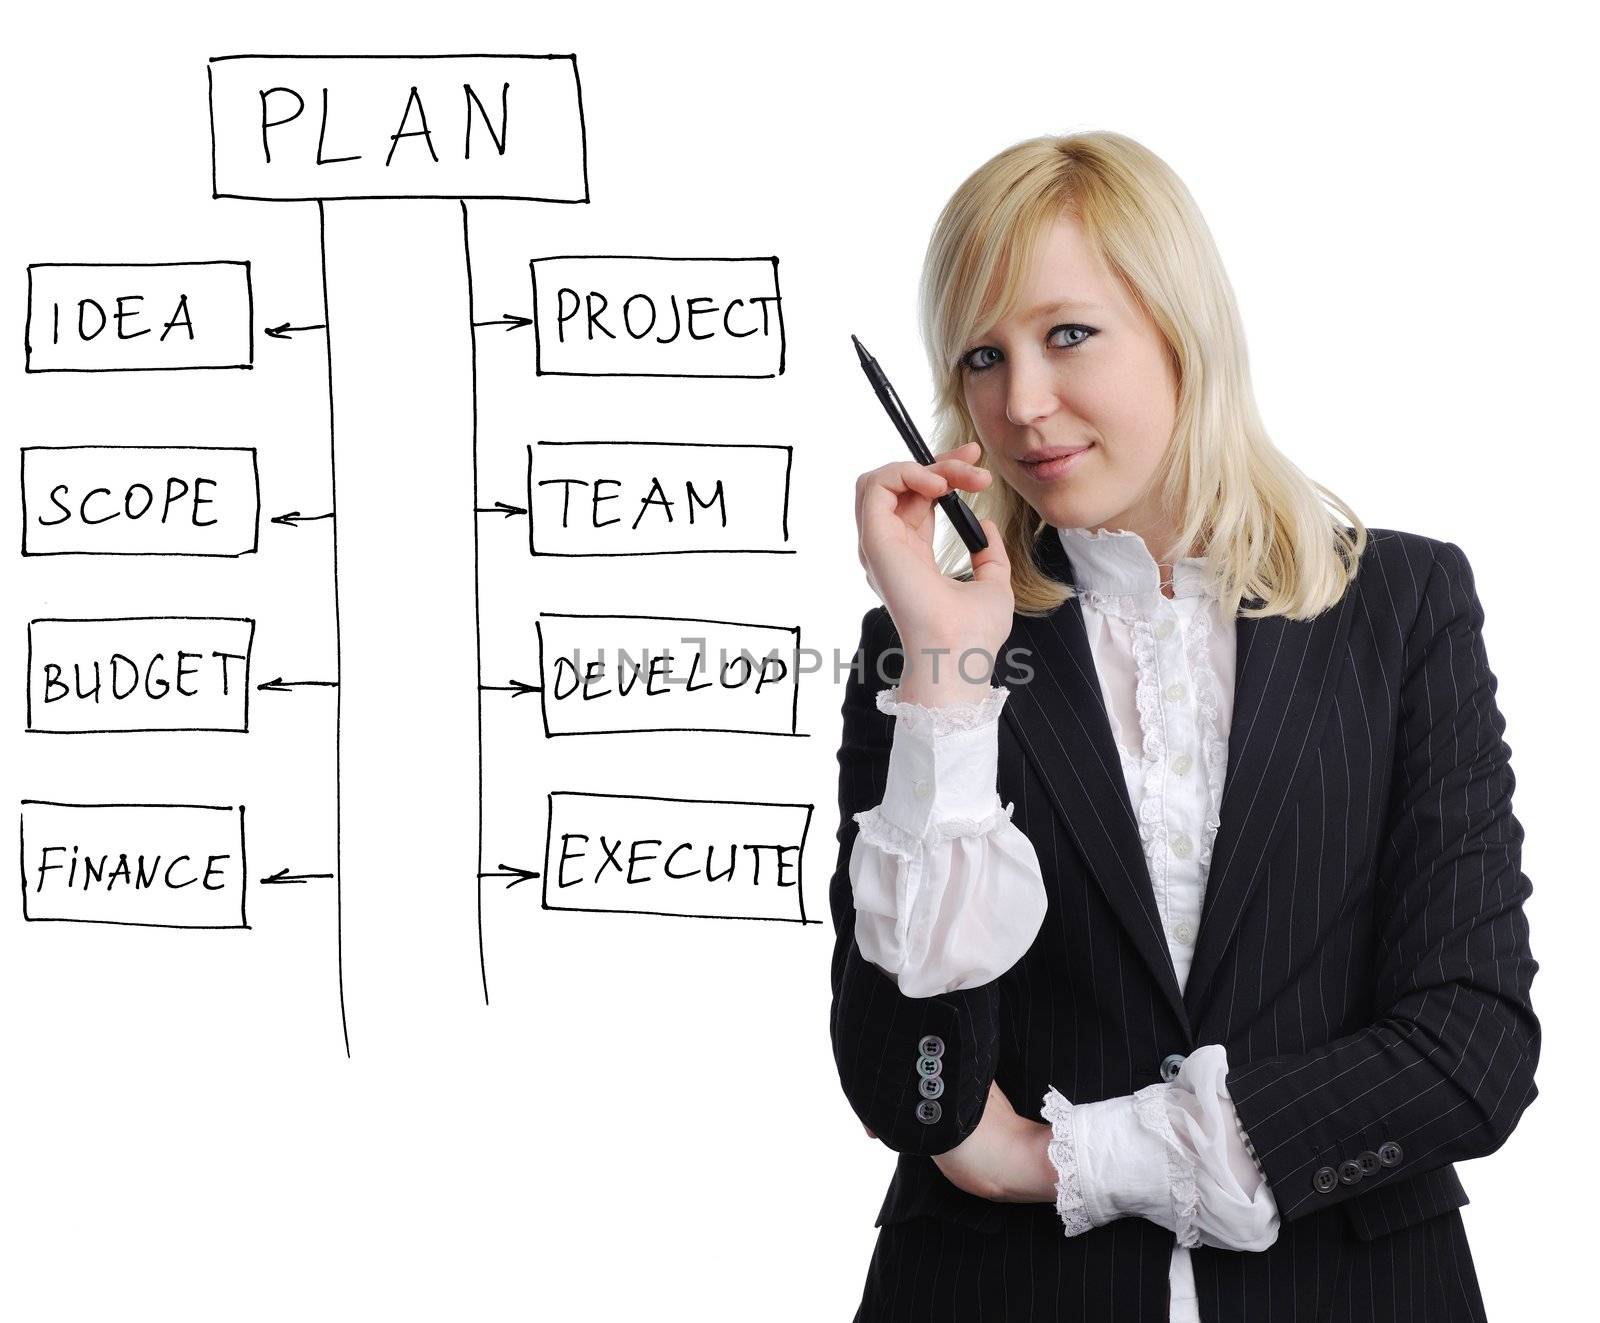 An image of a businesswoman making a plan